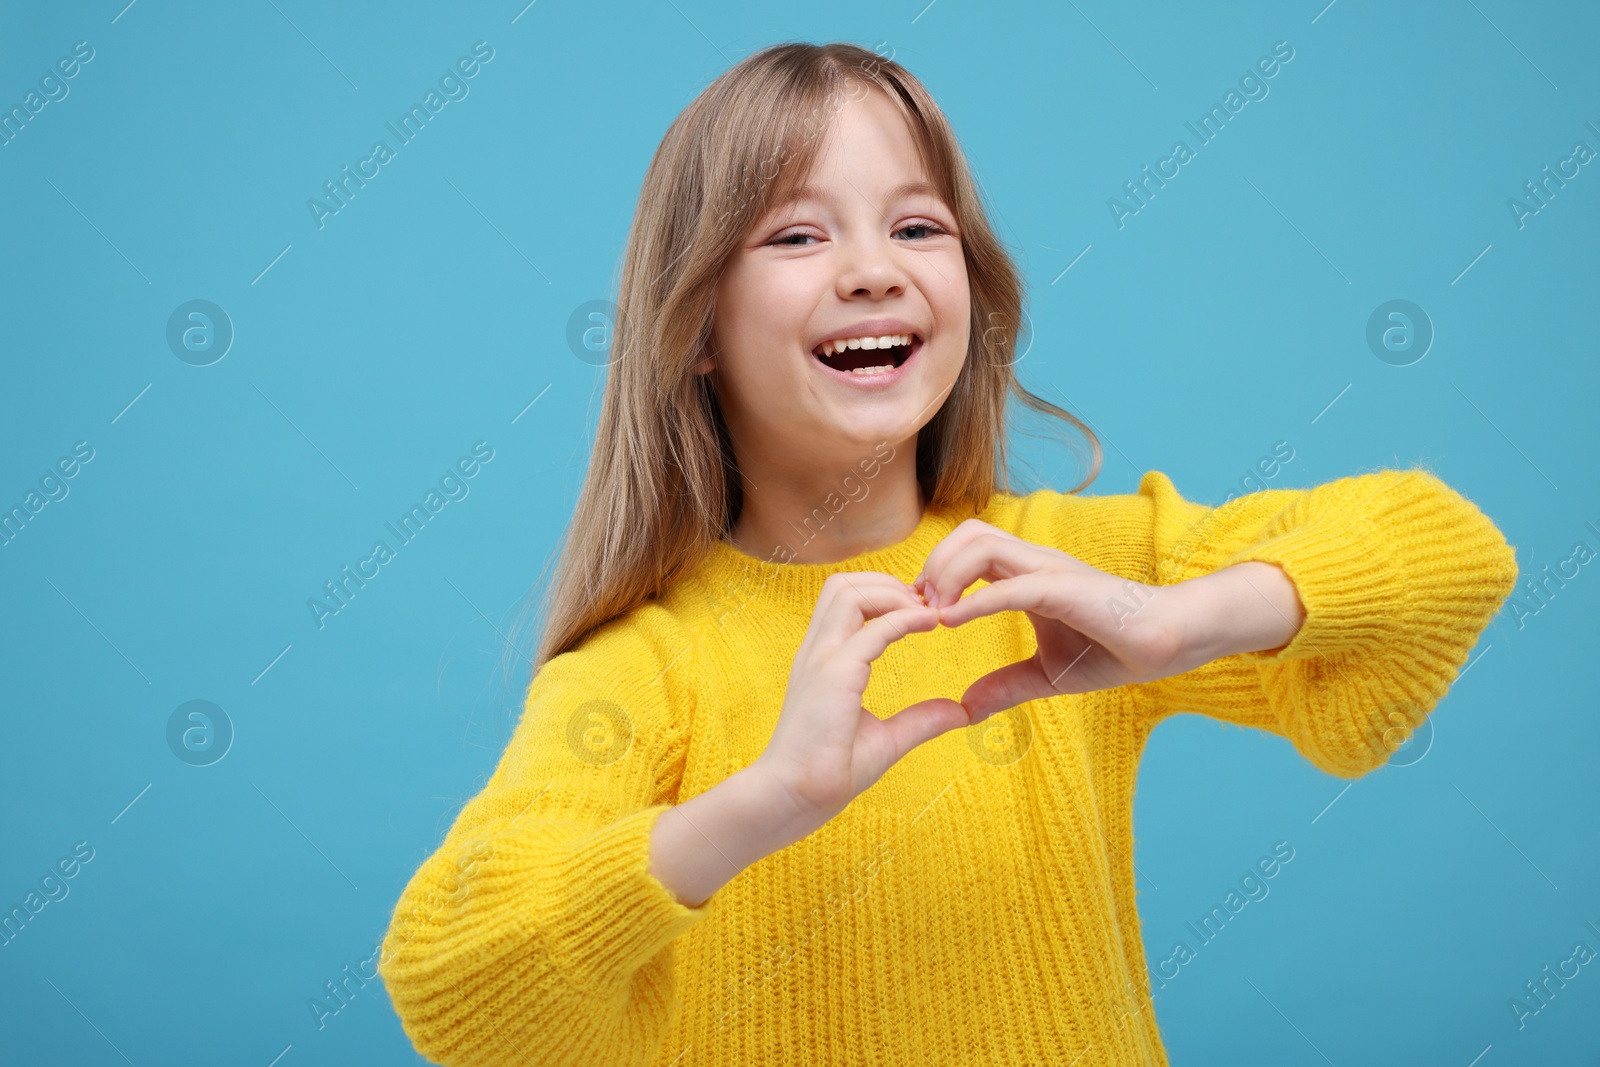 Photo of Happy girl showing heart gesture with hands on light blue background